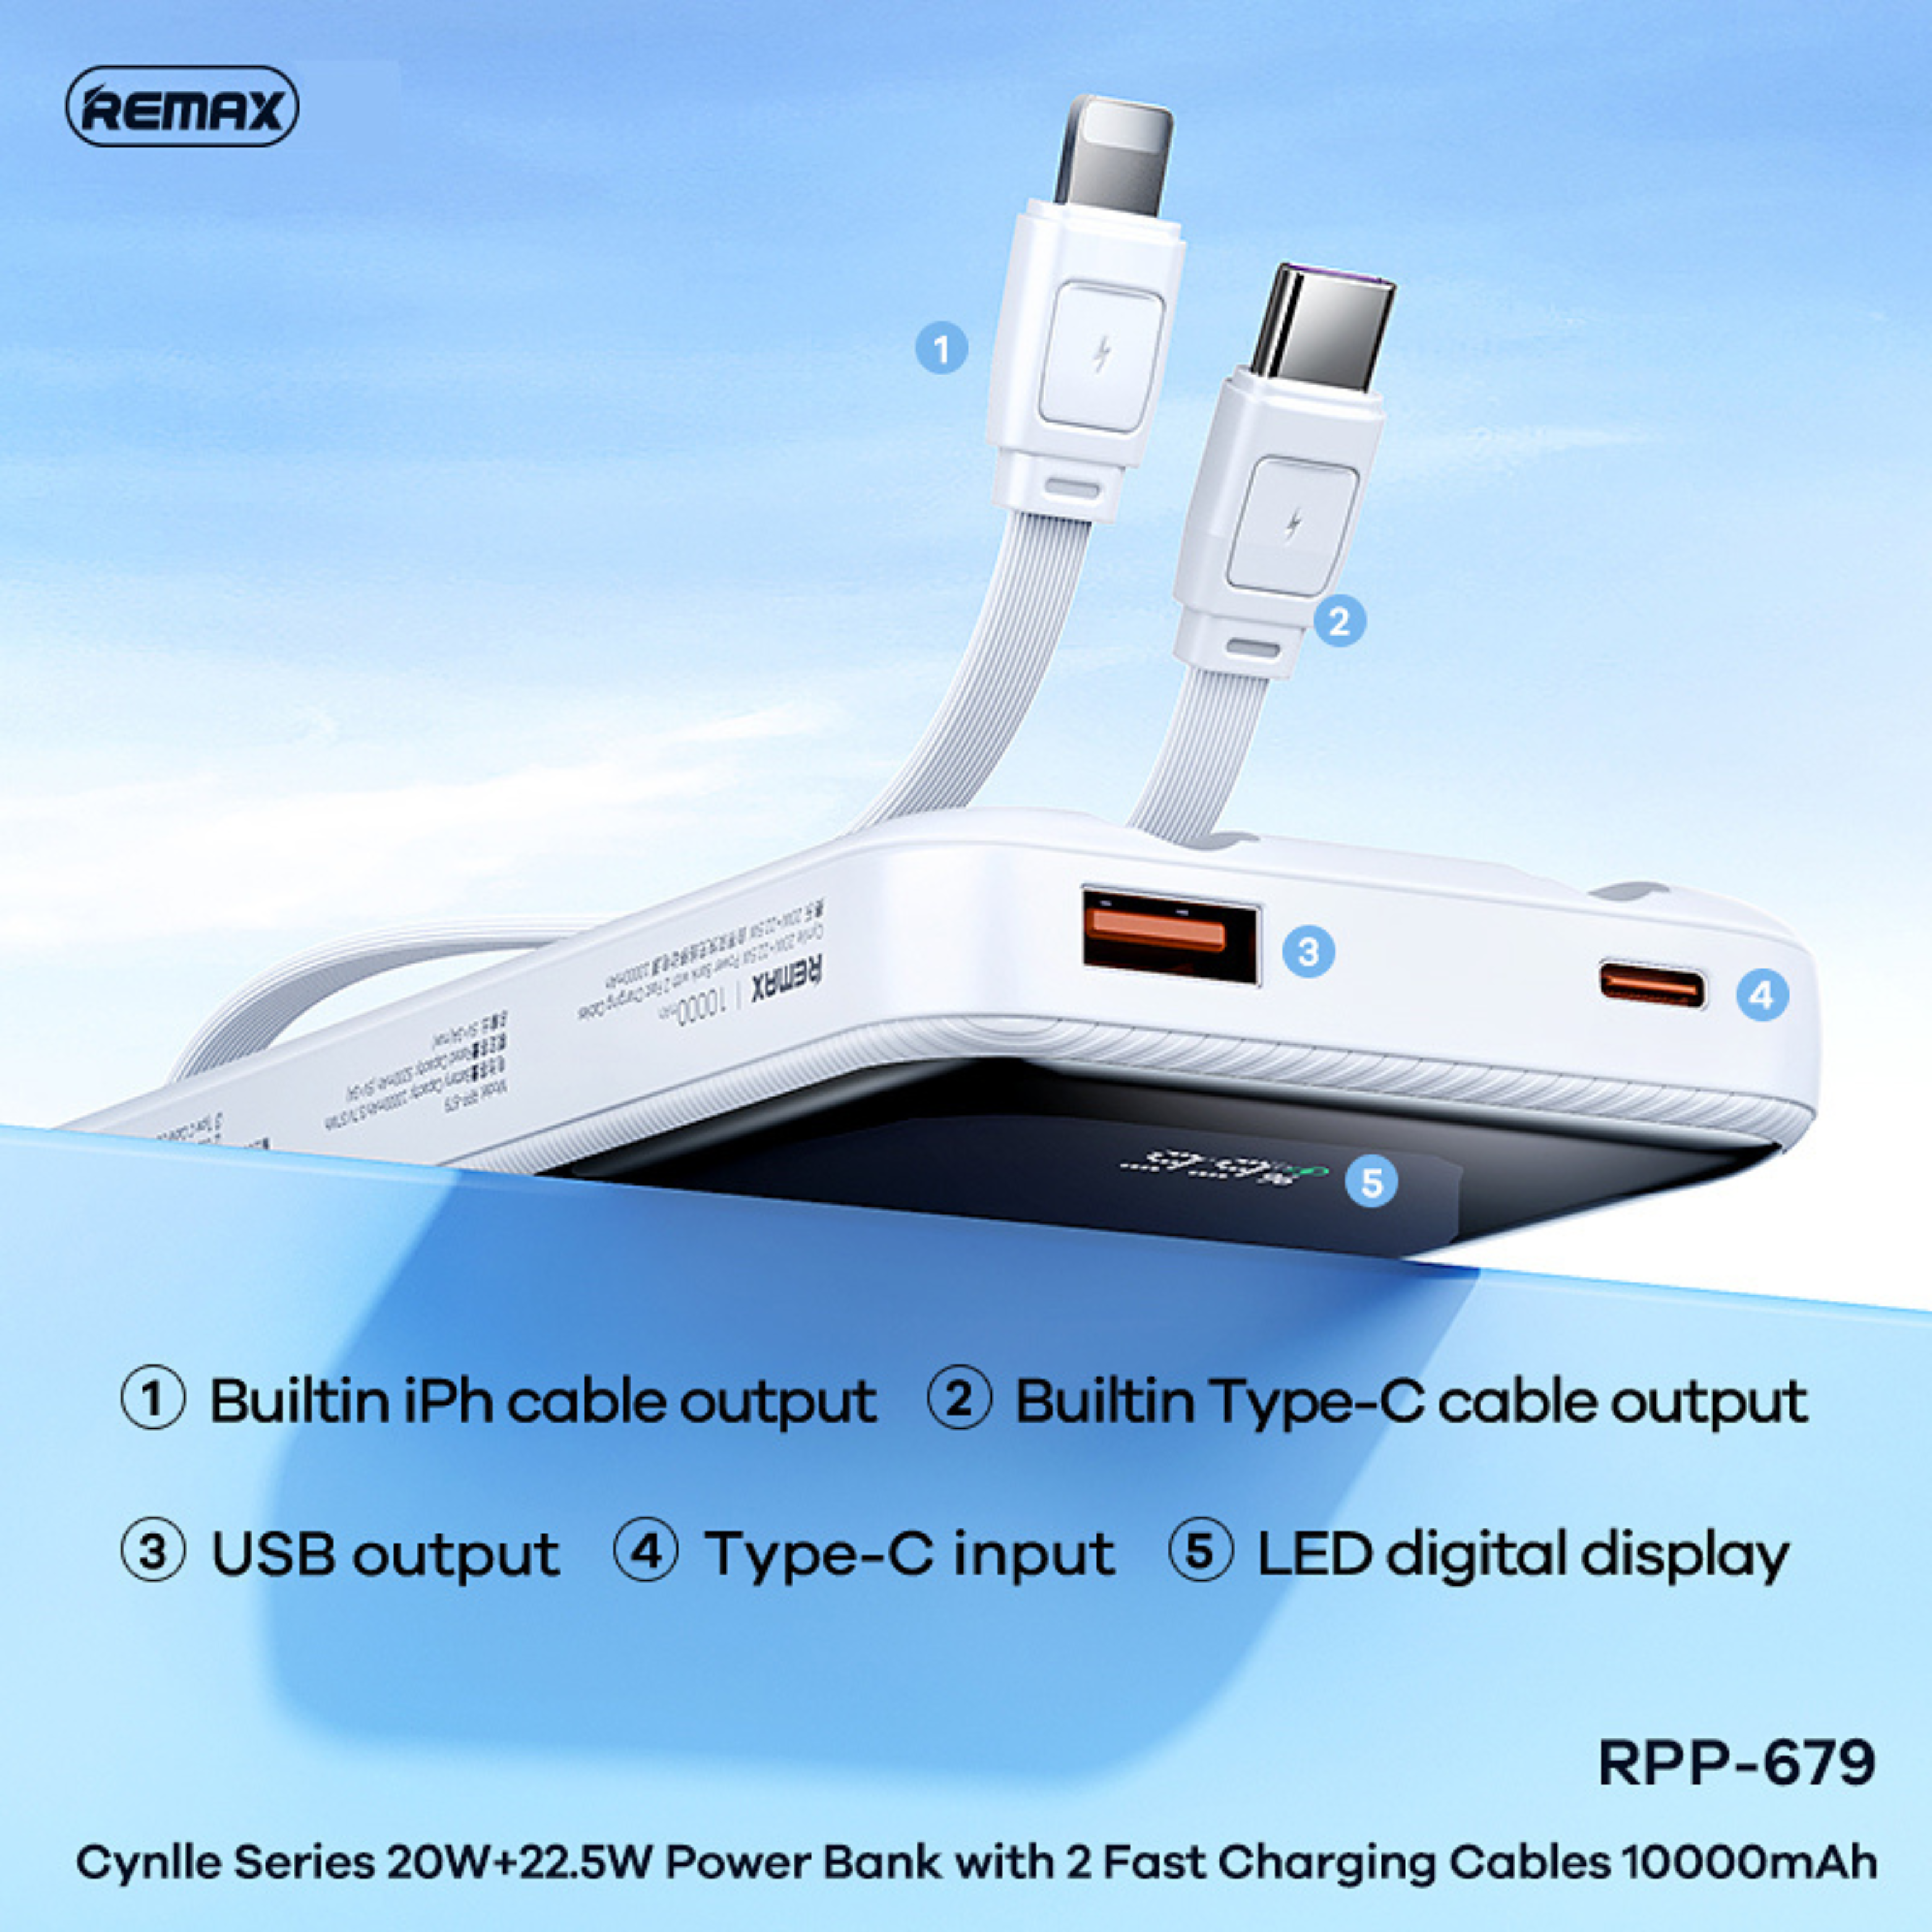 REMAX RPP-679 10000MAH CYNLLE SERIES 20W+22.5W POWER BANK WITH 2 FAST CHARGING CABLE(White)